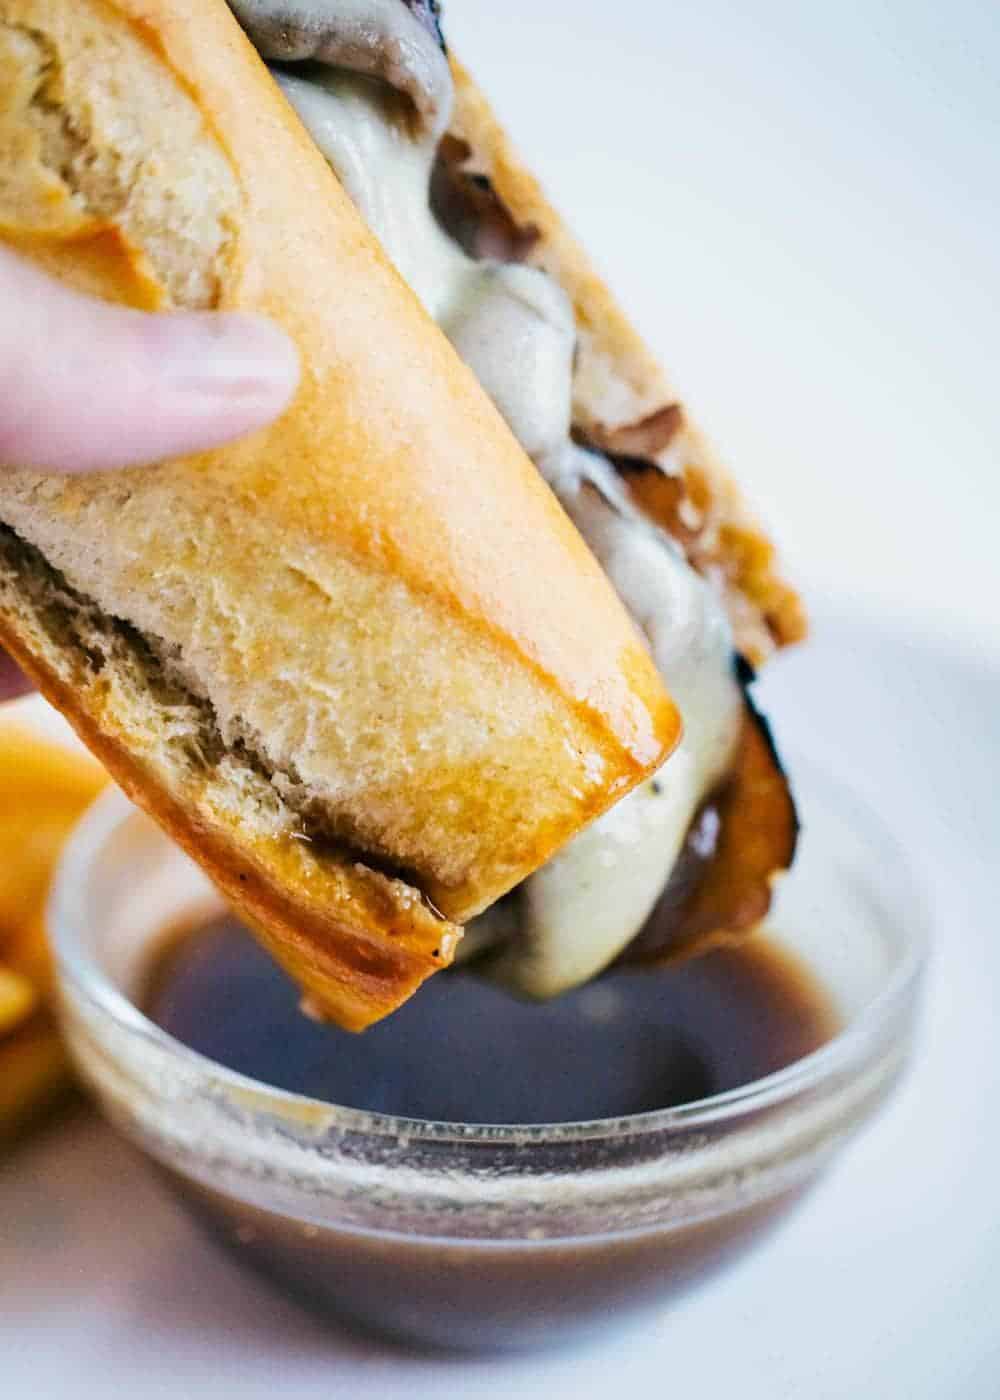 Where can i get a french dip sandwich near me 10 Minute French Dip Sandwich Recipe I Heart Naptime